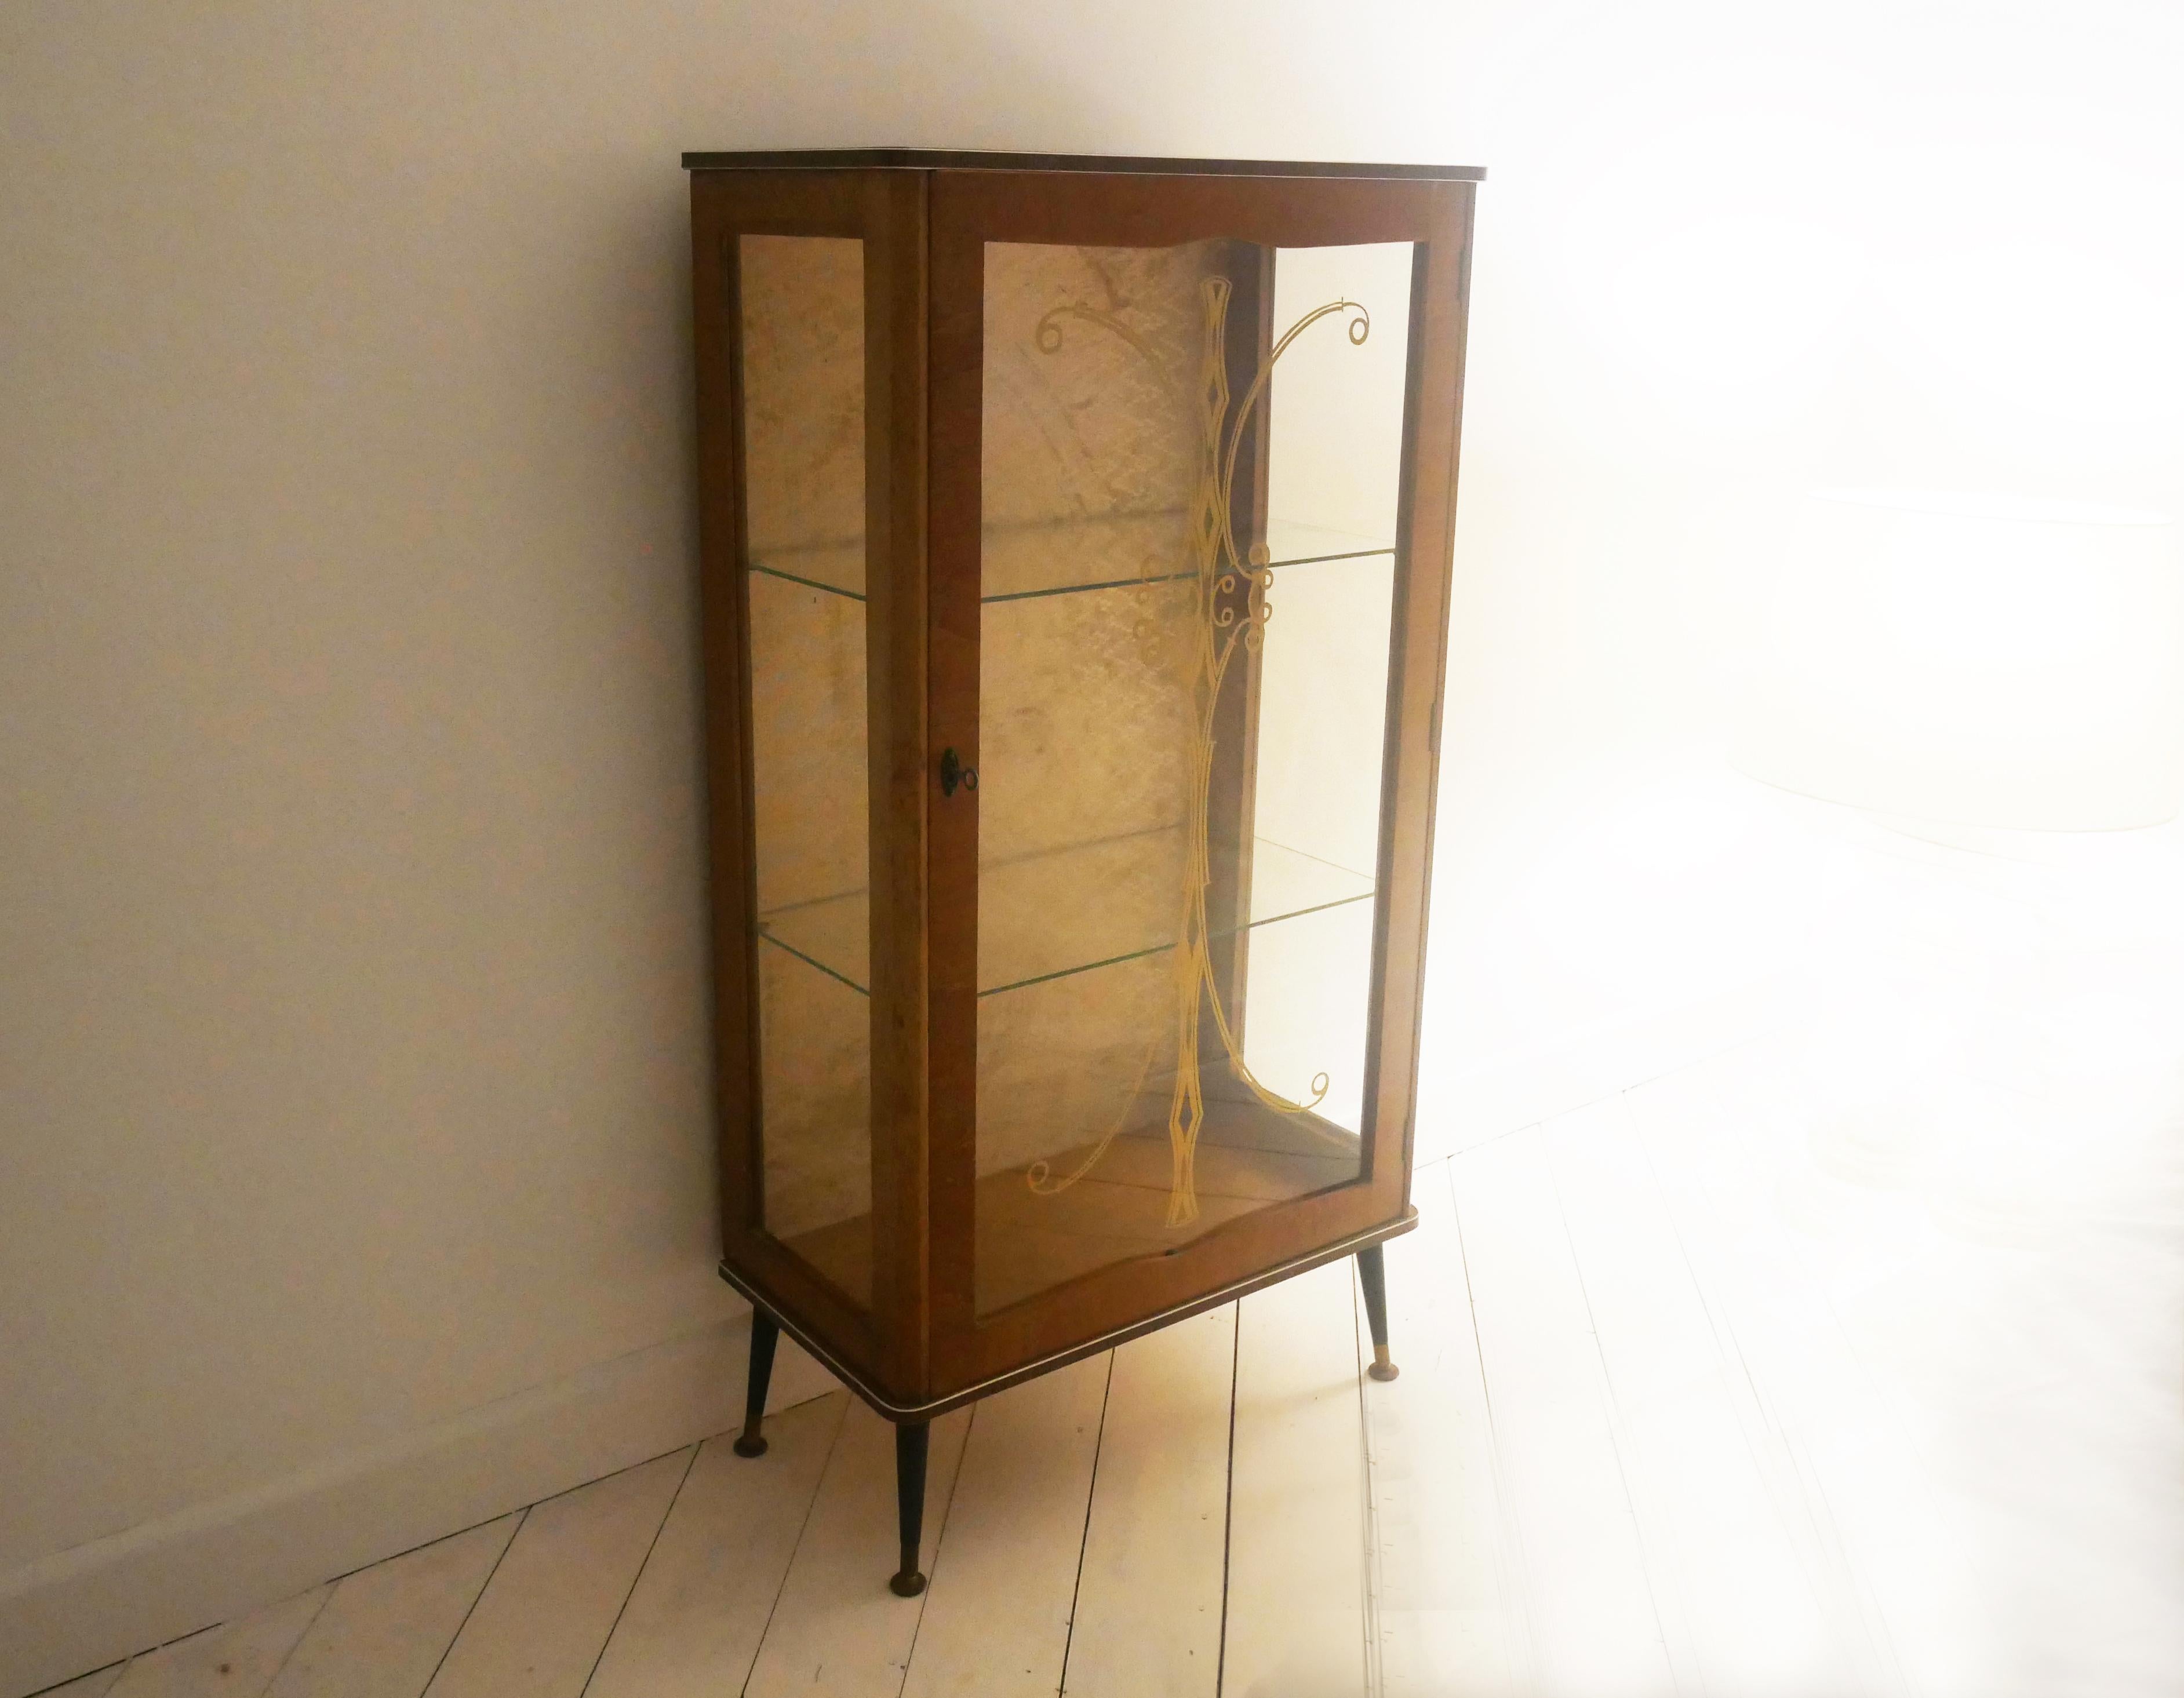 Elegant 1950’s vintage glass display cabinet, with gold decoration on door, and two glass shelves within. The interior back is lined with the original silver patterned material. Sits on black painted teak las with brass tips. Key supplied.

Size